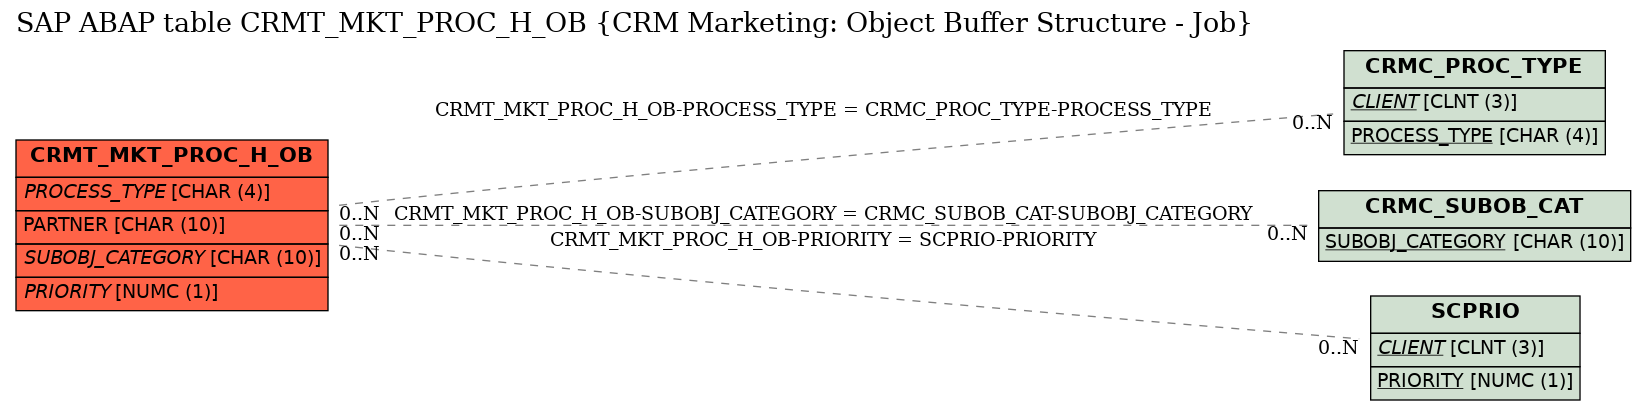 E-R Diagram for table CRMT_MKT_PROC_H_OB (CRM Marketing: Object Buffer Structure - Job)